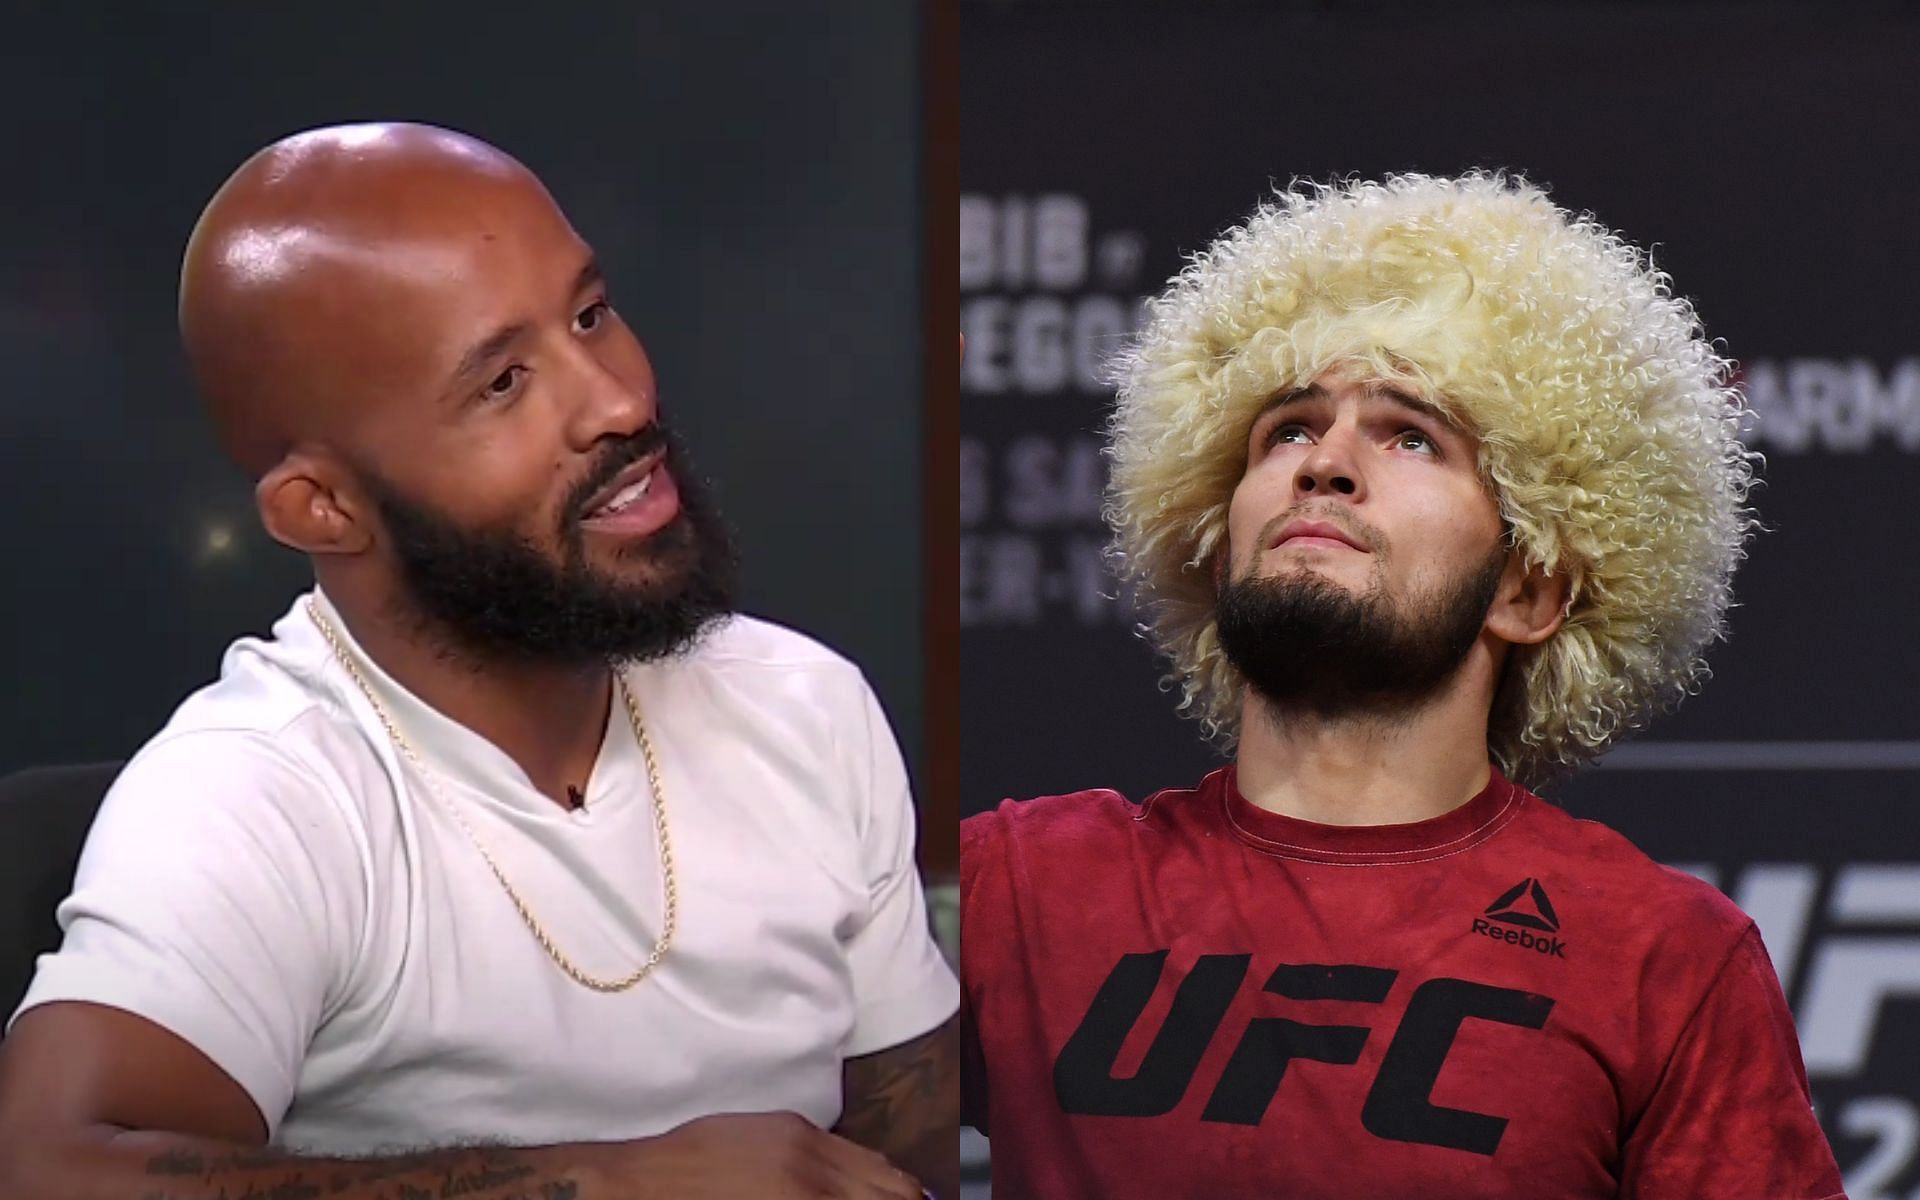 Demetrious Johnson (L) believes Khabib Nurmagomedov (R) would have lost a fight if he still competed in the UFC [Credits: The MMA Hour/YouTube, Getty]